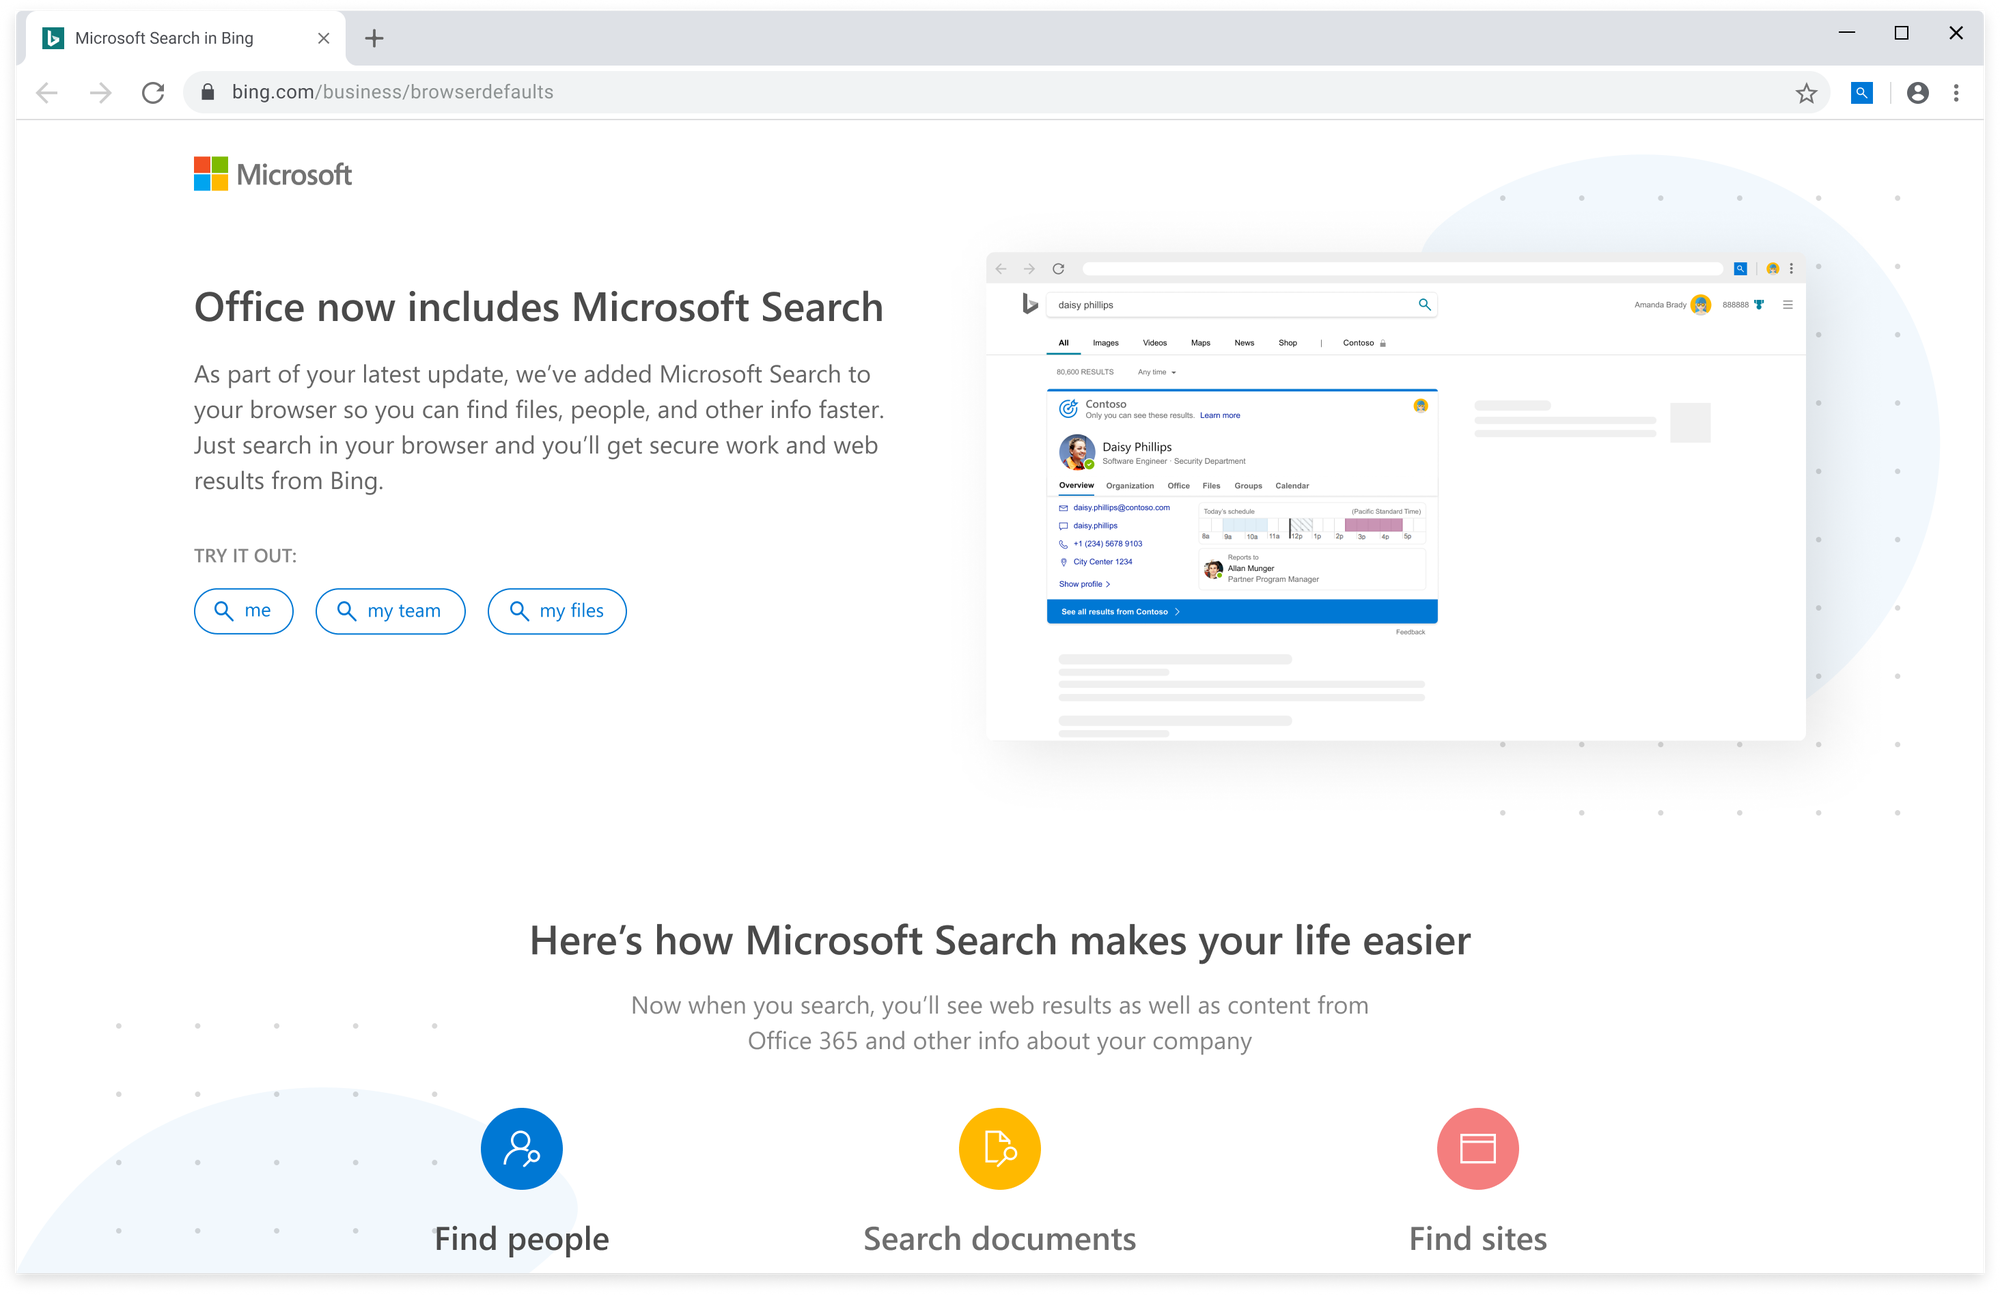 Microsoft Search in Bing will be default if you use Office 365 ProPlus welcome-chrome.png